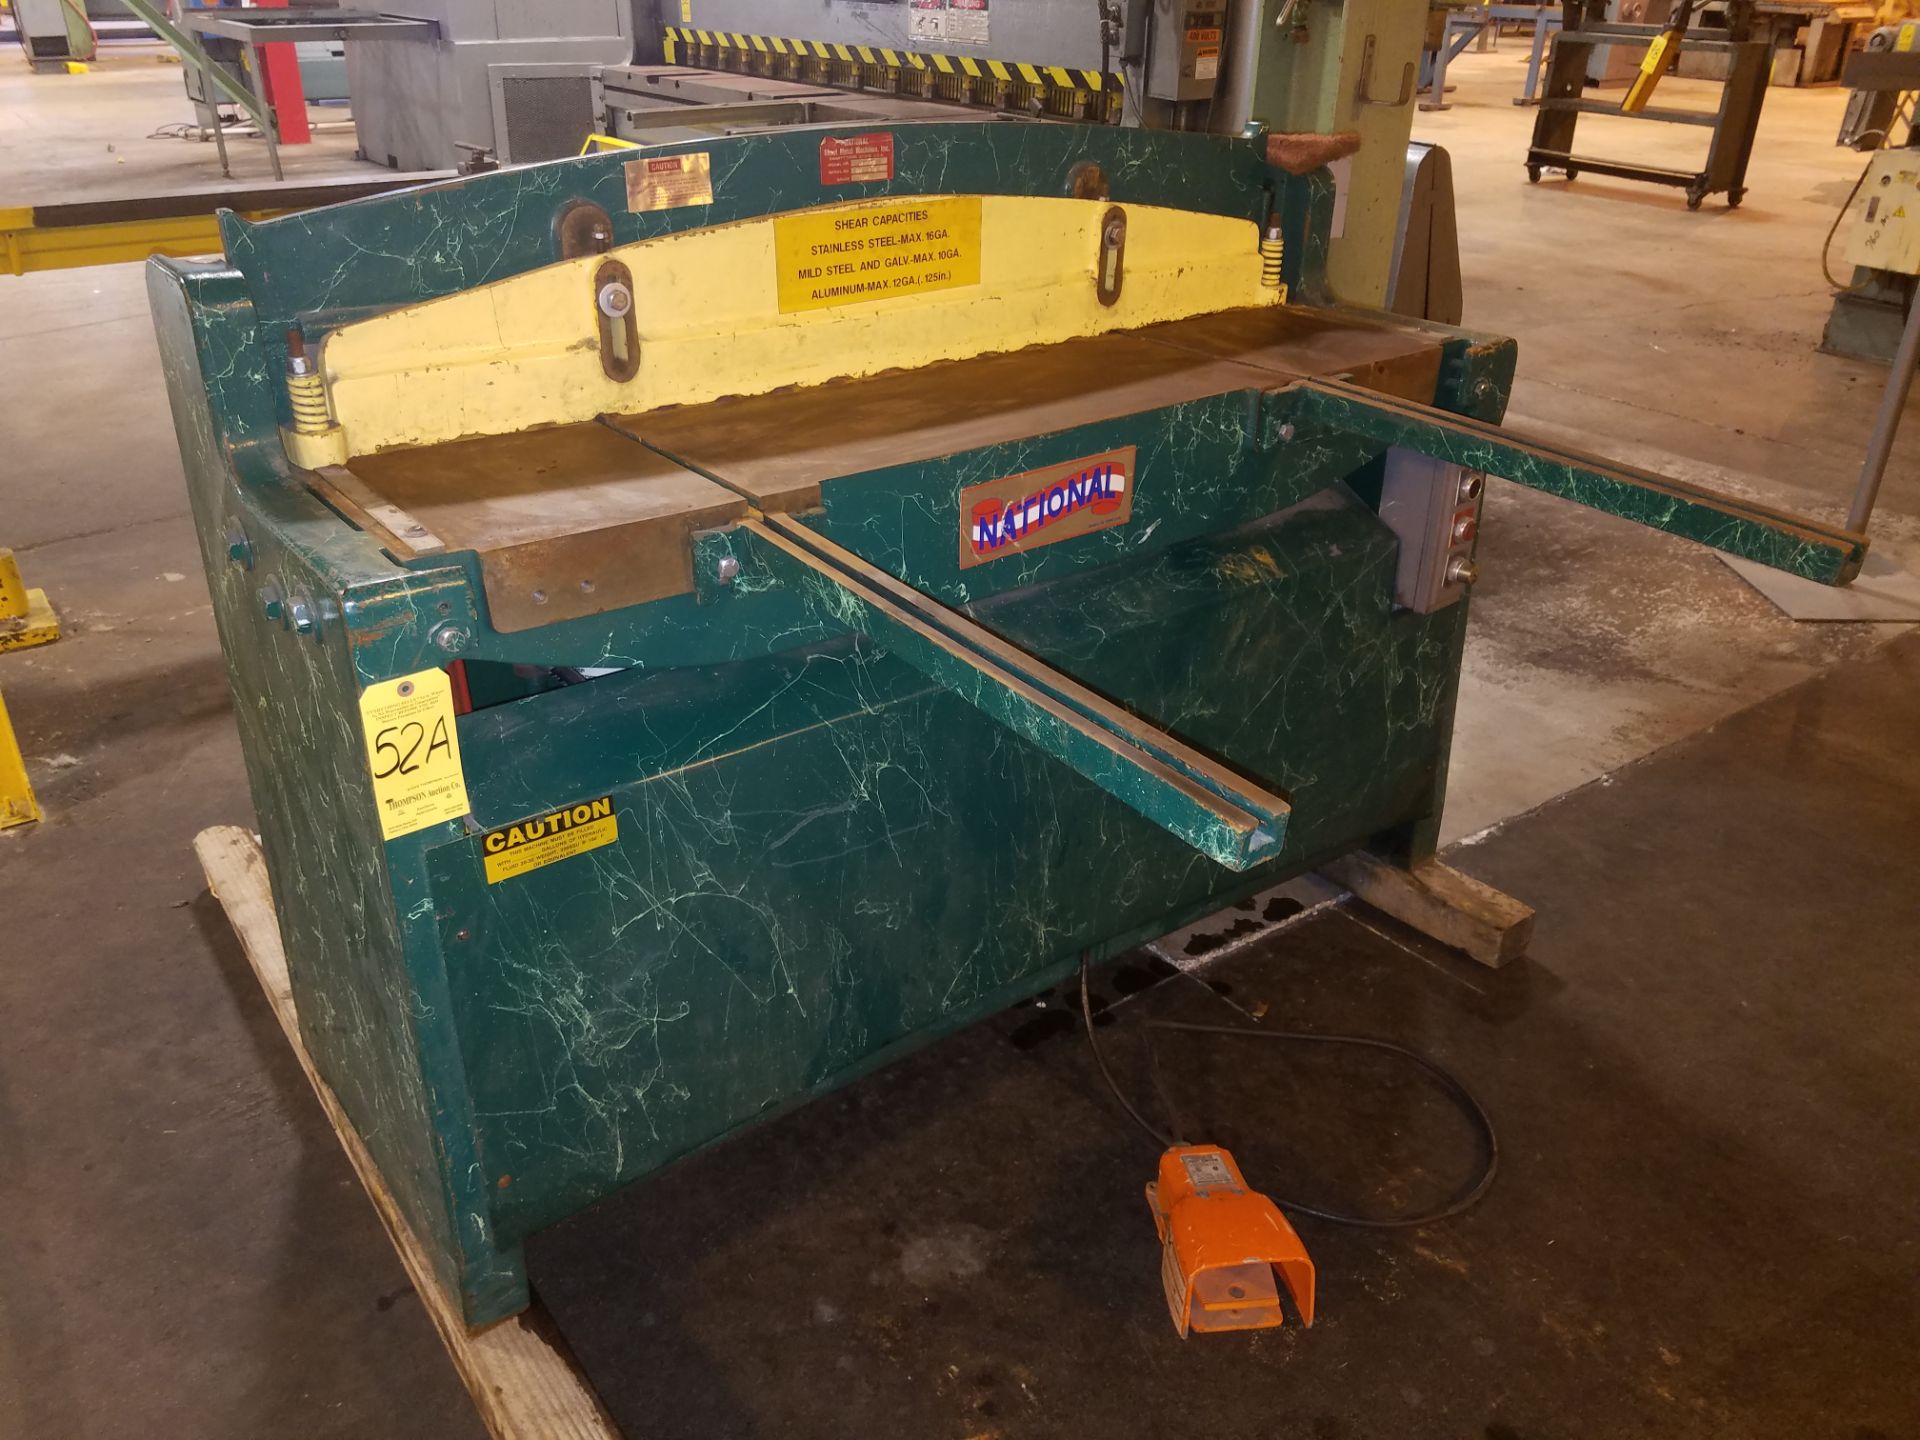 National 52 Inch X 10 Gauge Power Shear, (2) Front Sheet Supports, Loading Fee $50.00